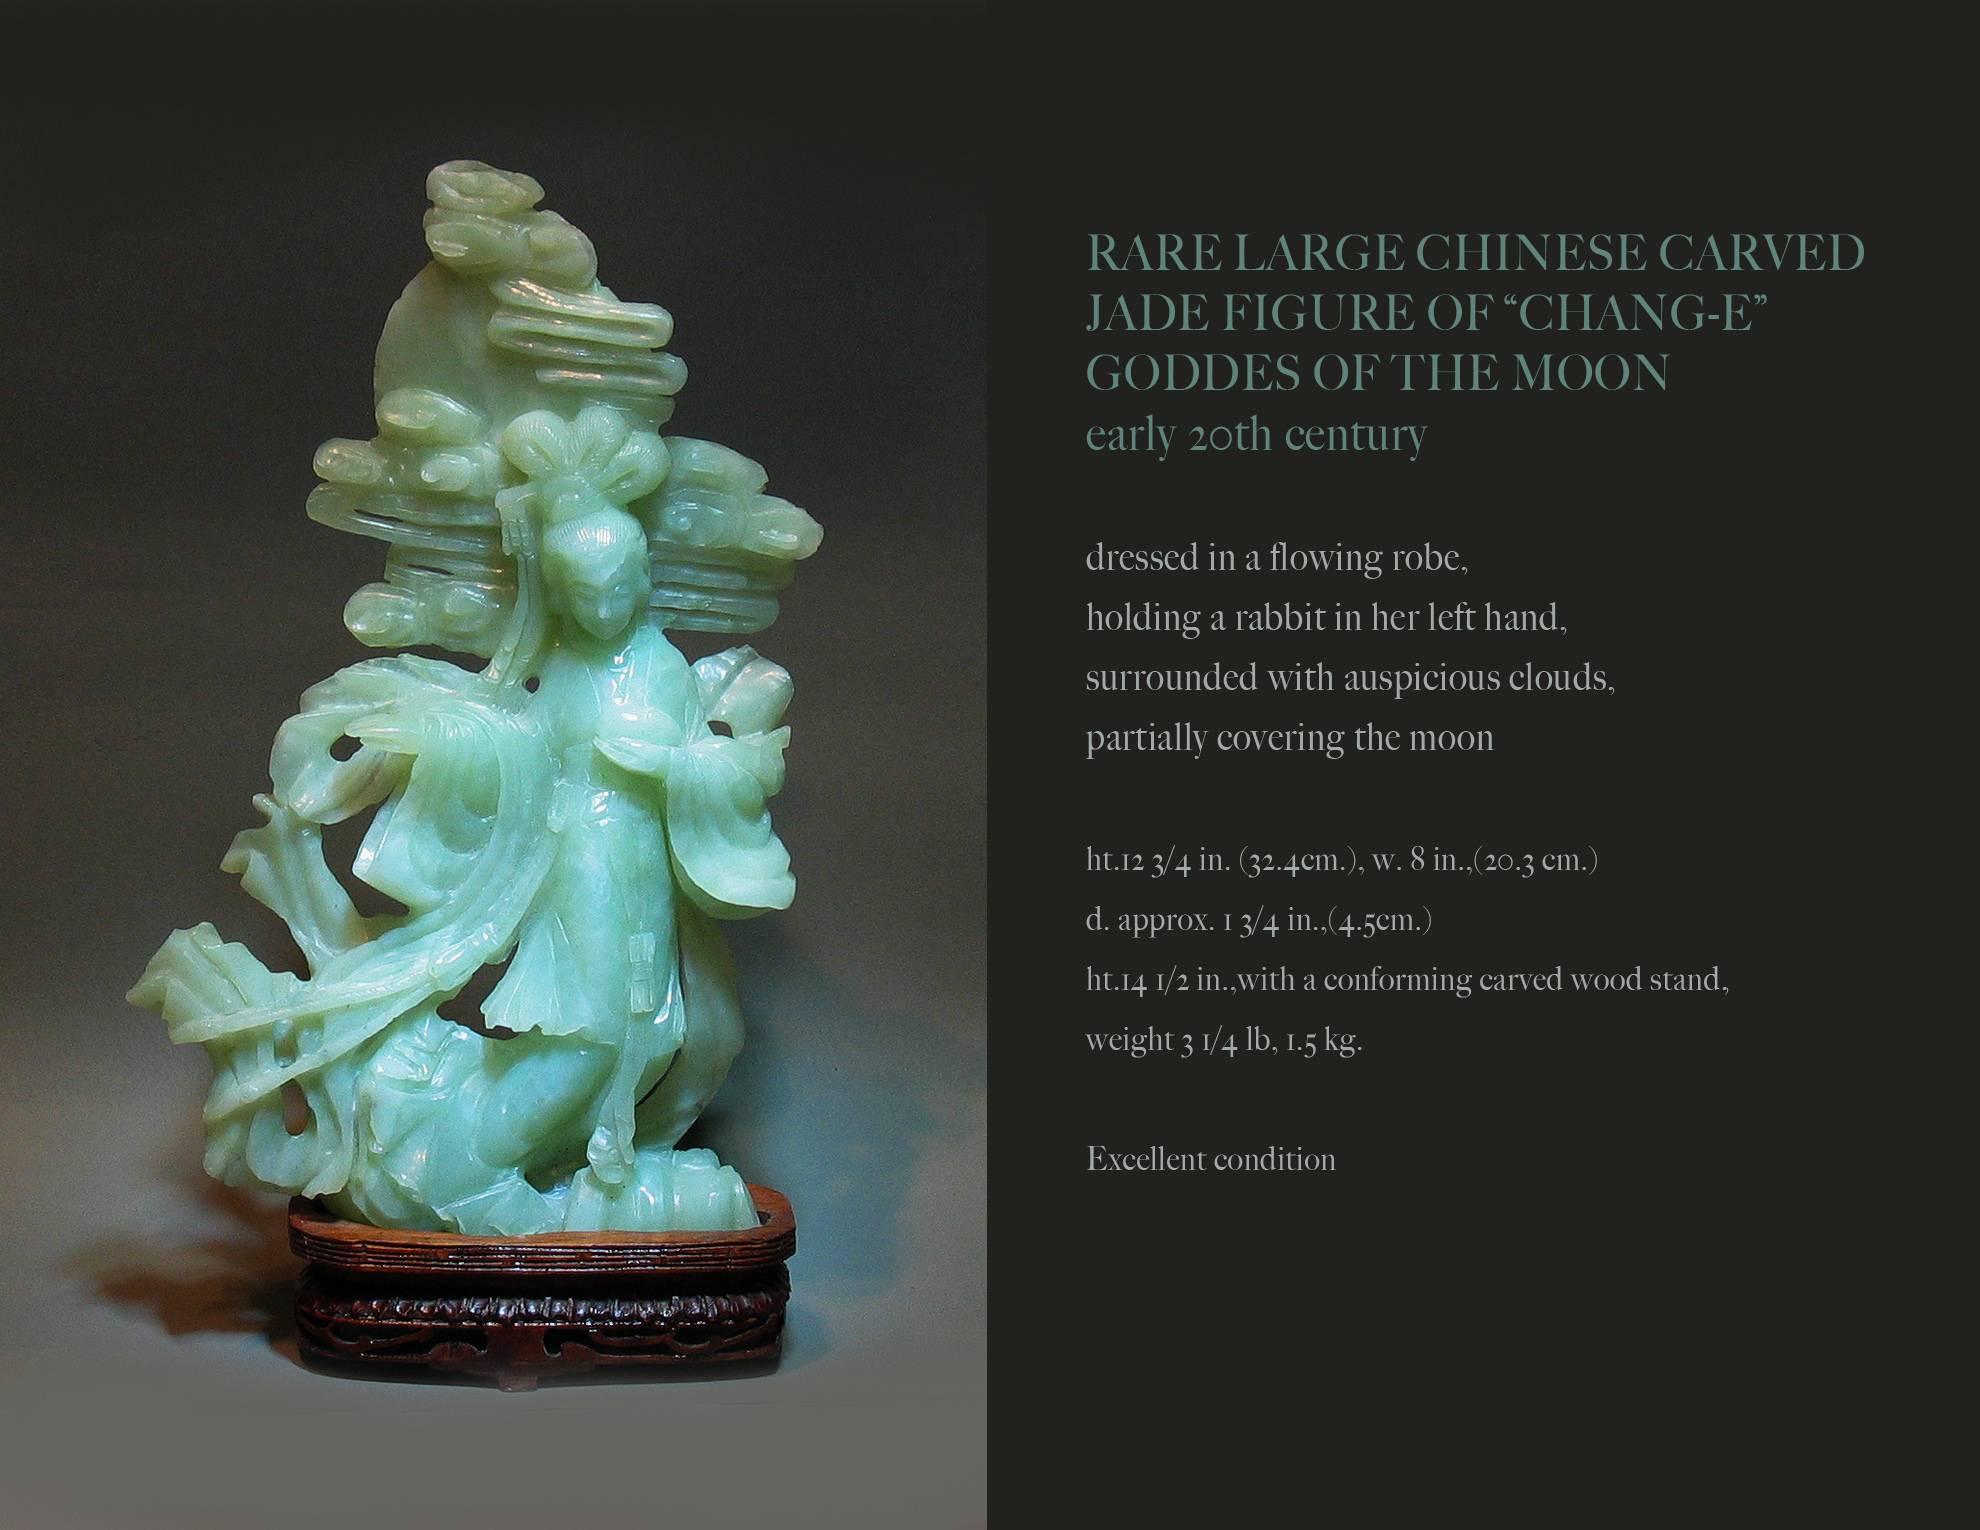 Rare large Chinese carved jade figure of "Change-E" Goddess of the Moon, early 20th century. 
Dressed in a flowing robe, holding a rabbit in her left hand, surrounded with auspicious clouds, partially covering the moon. The Jade figurine